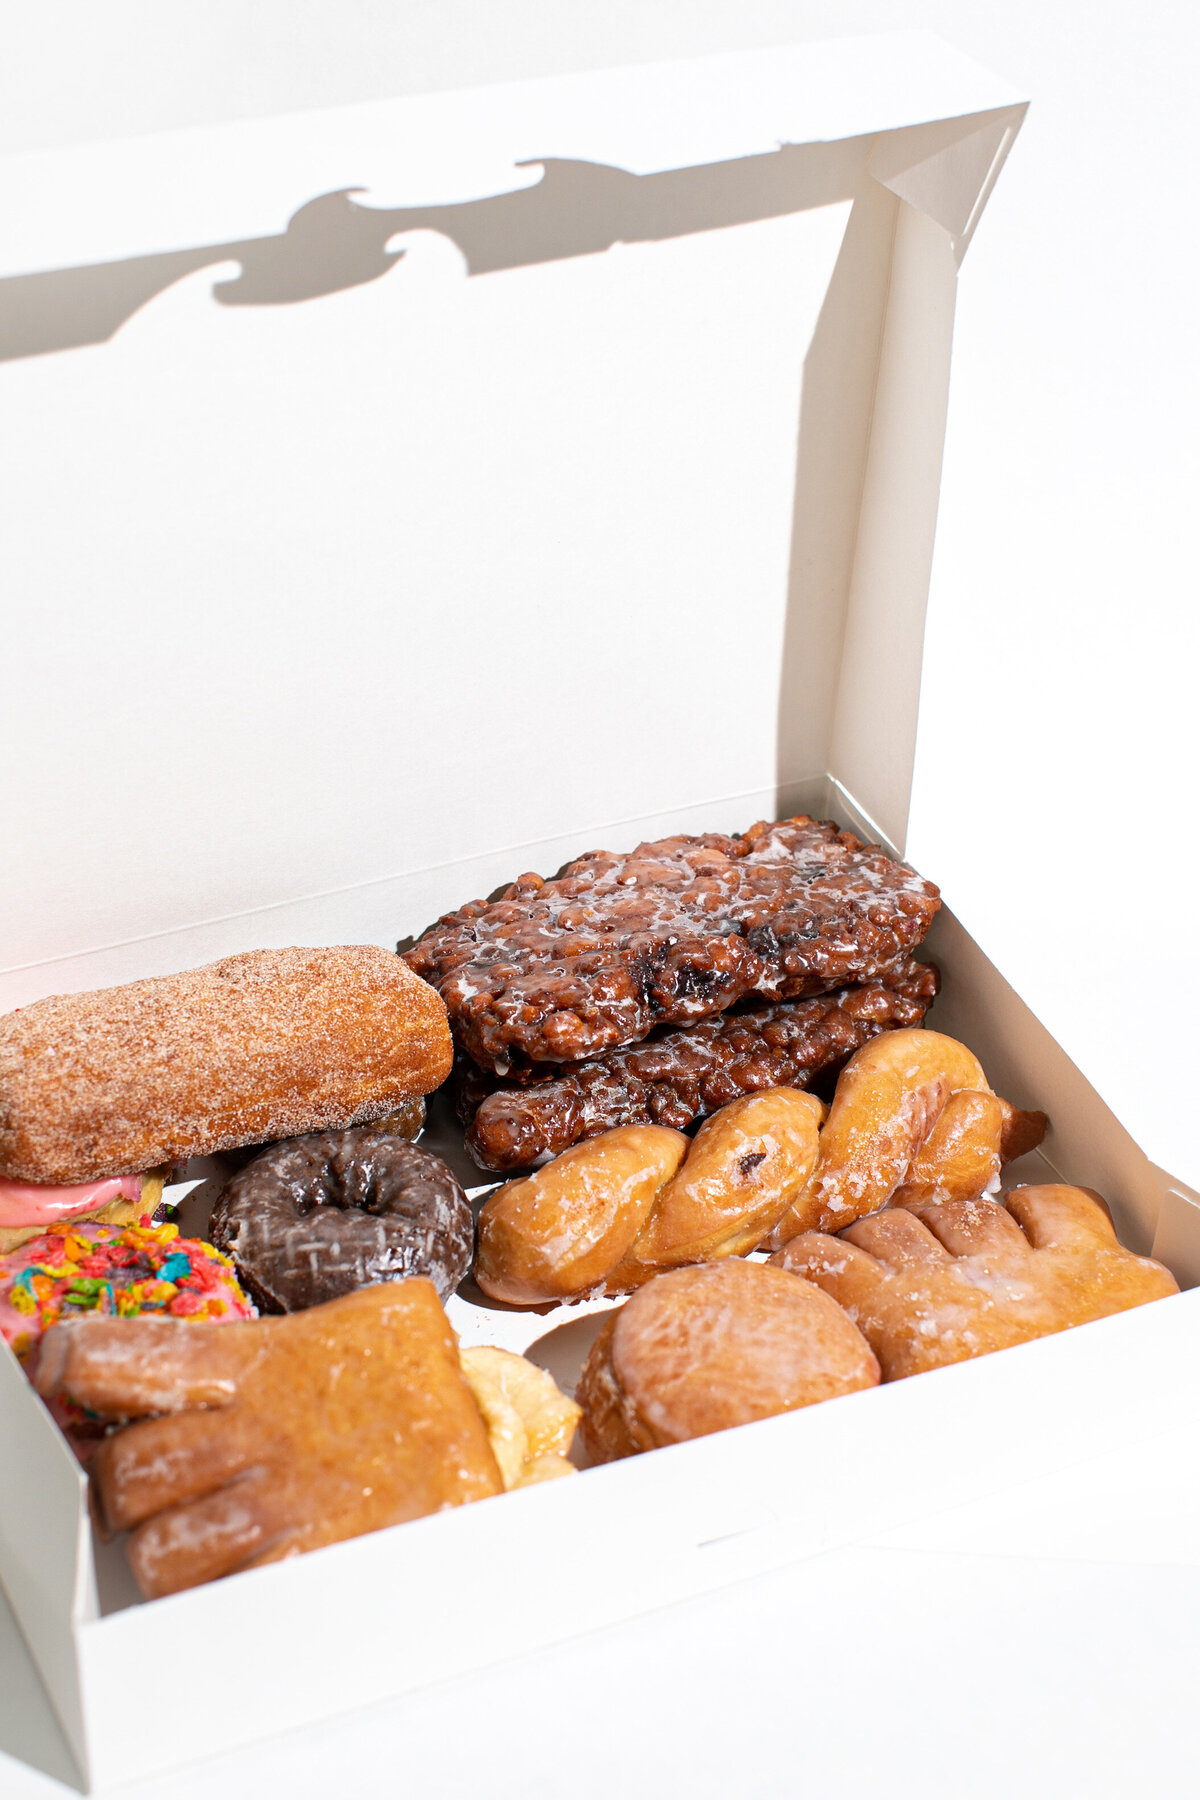 Assorted Donuts Piled up in a white box - Daylight Donuts